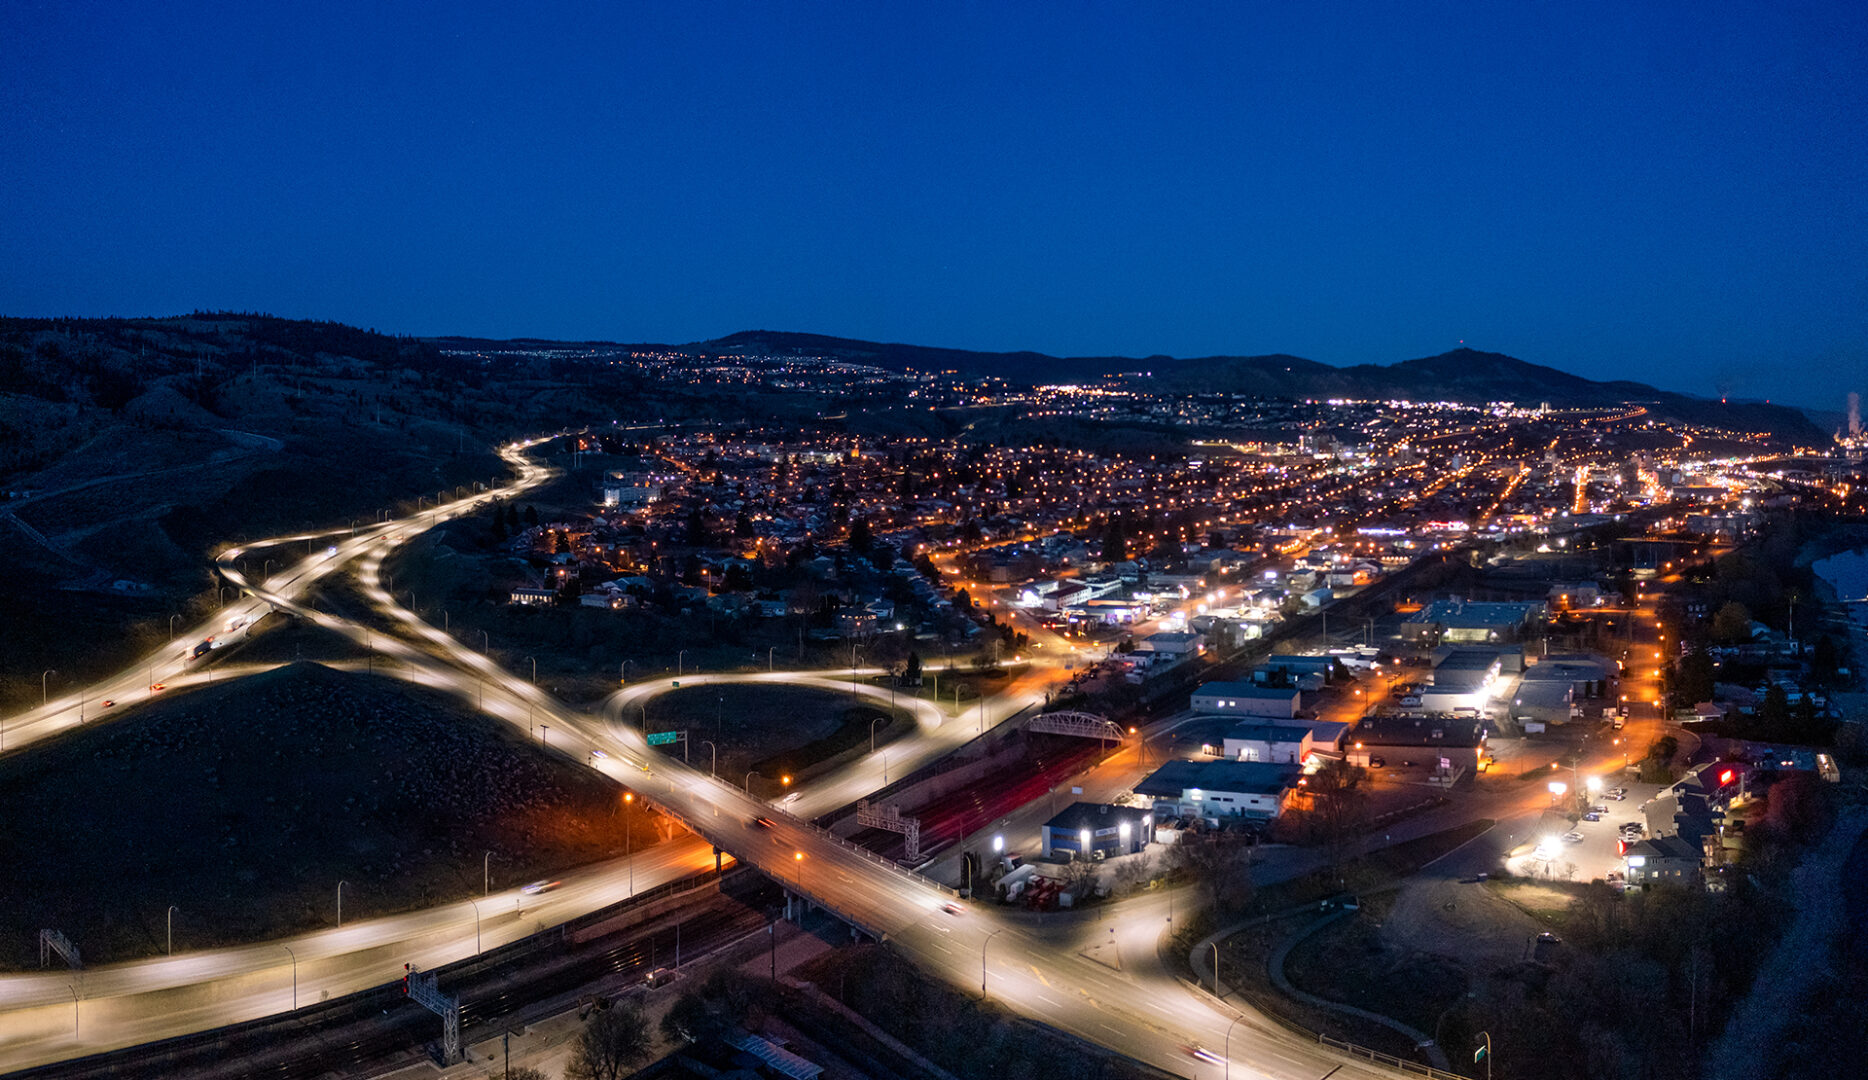 Kamloops City Aerial nighttime view with lights and road closeup